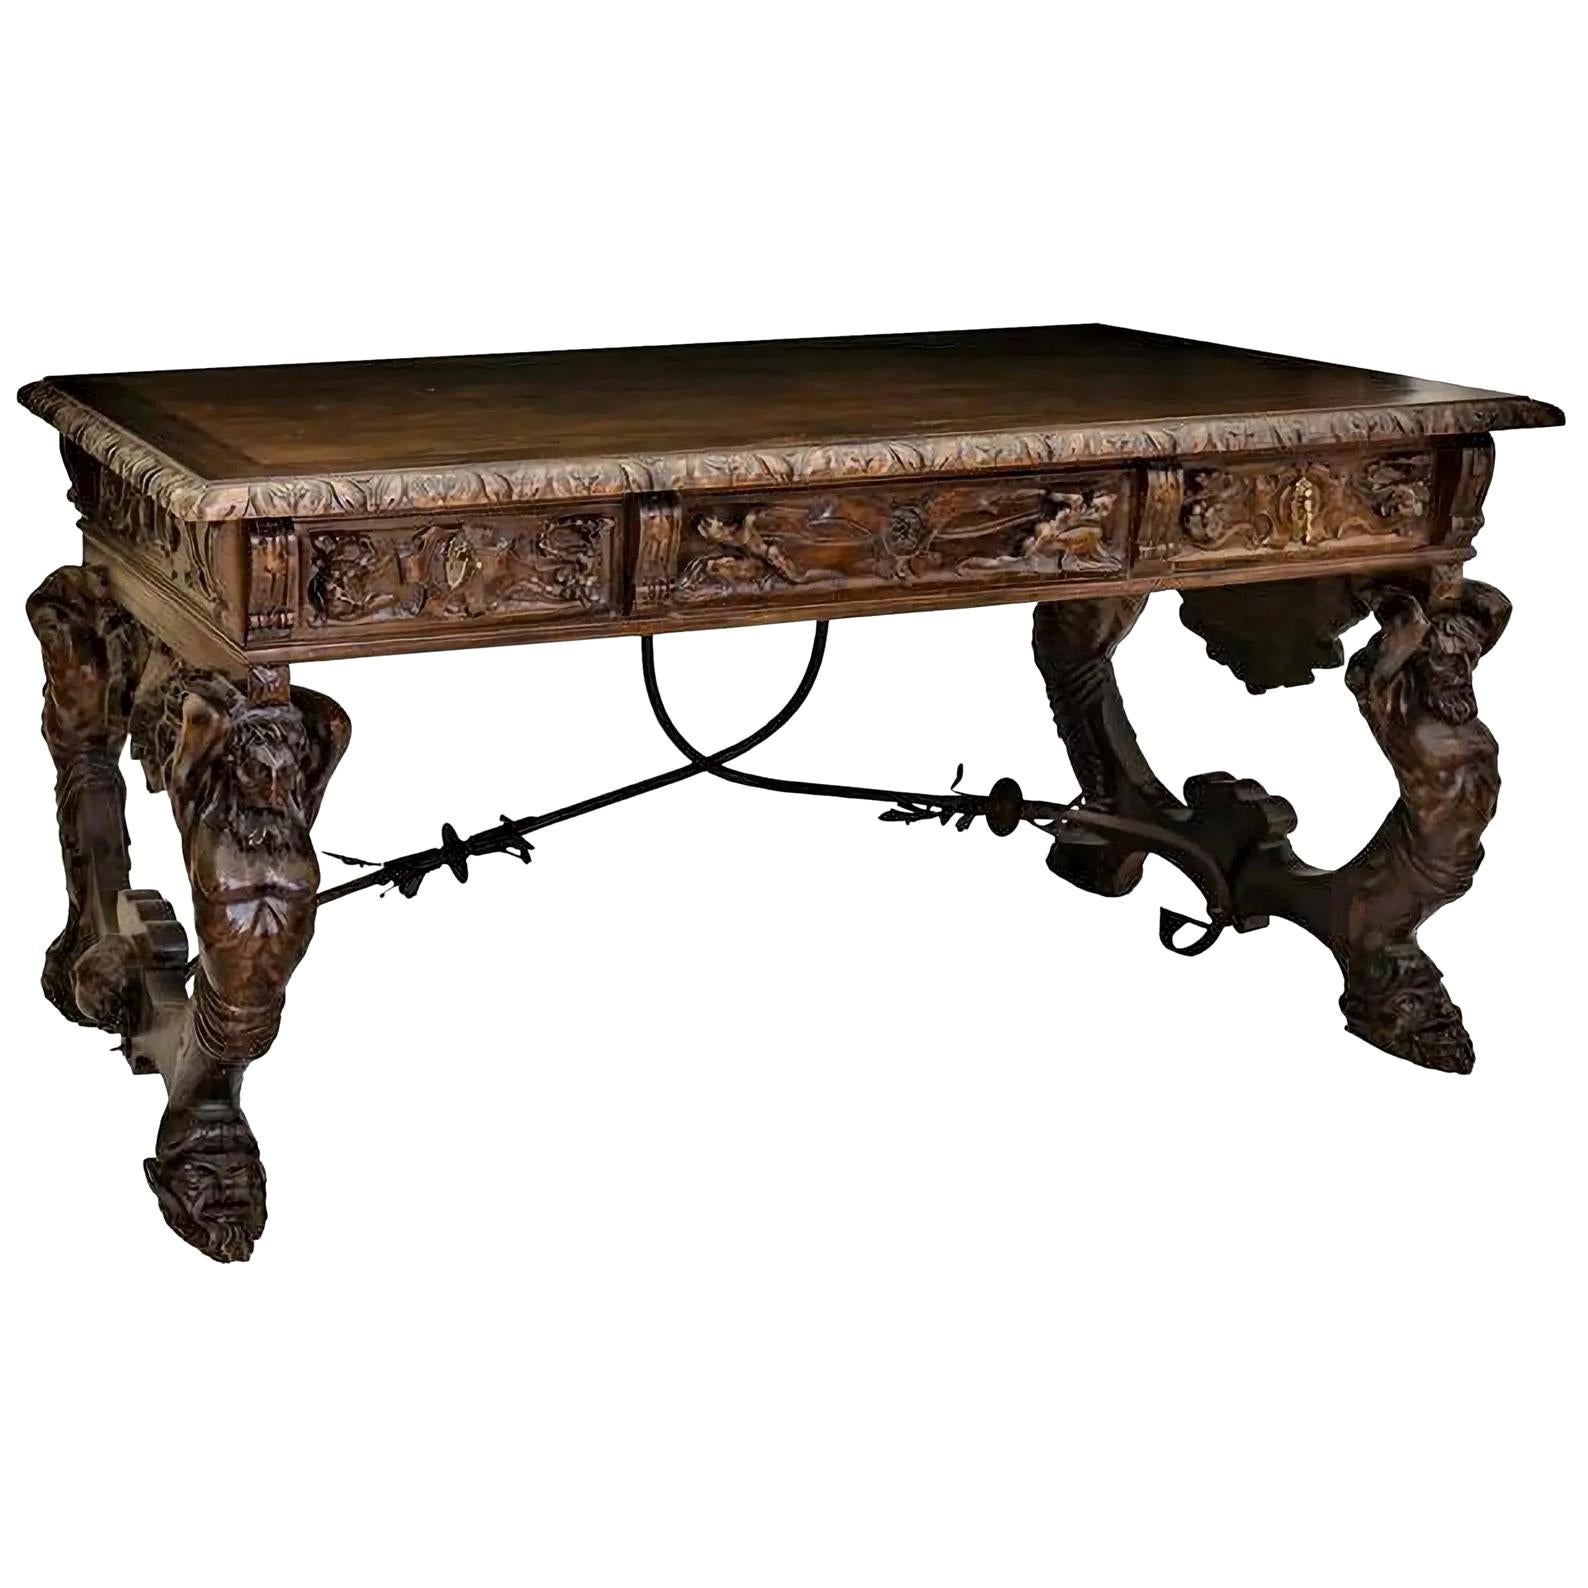 Spanish Wooden Table 19th Cent. Renaissance Style AT 30th September 20% DISCOUNT